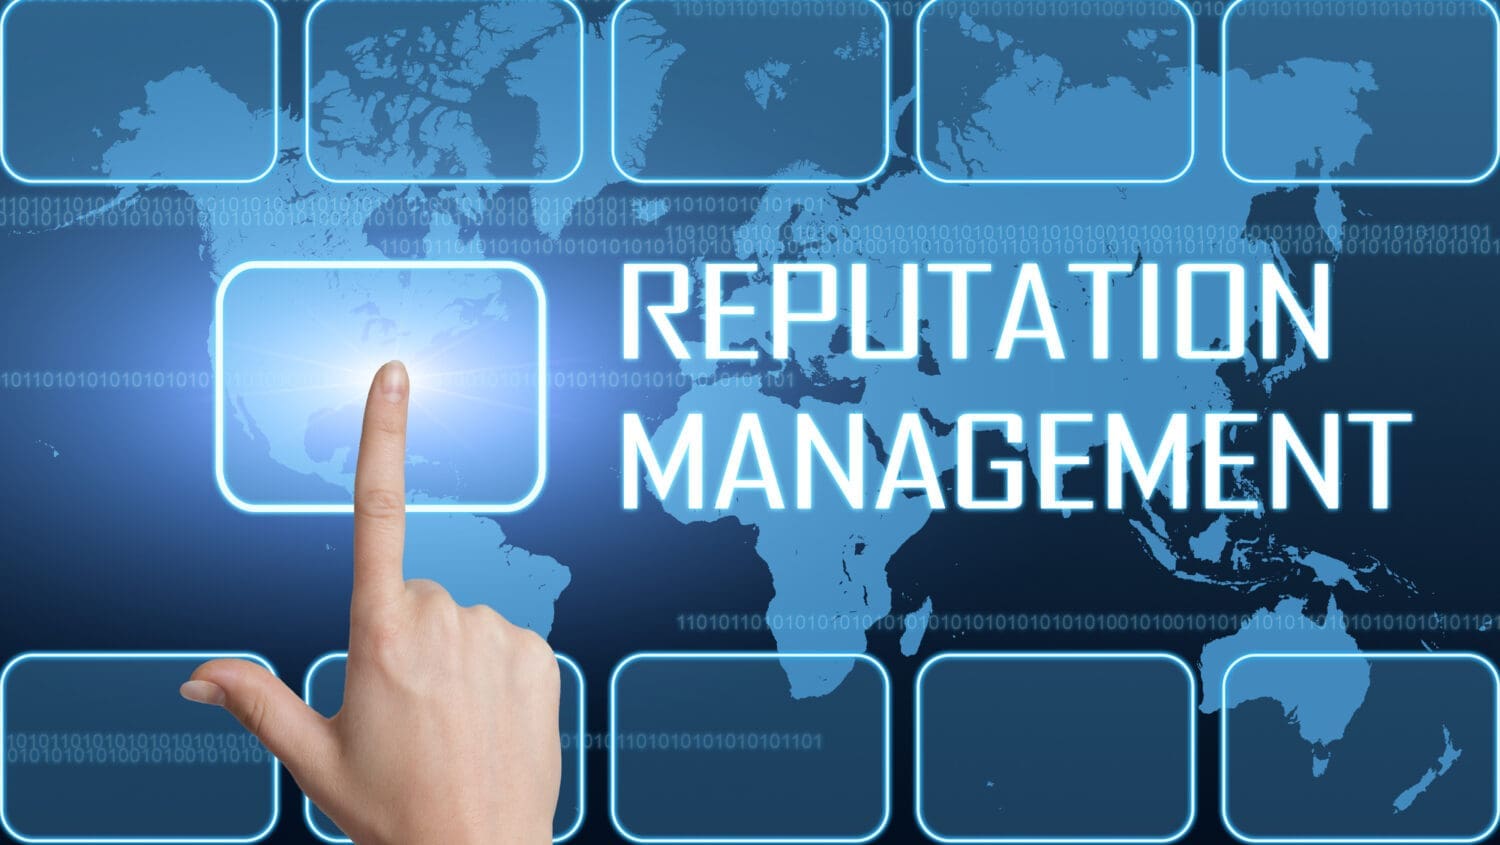 Brand reputation management is essential in today's marketplace.